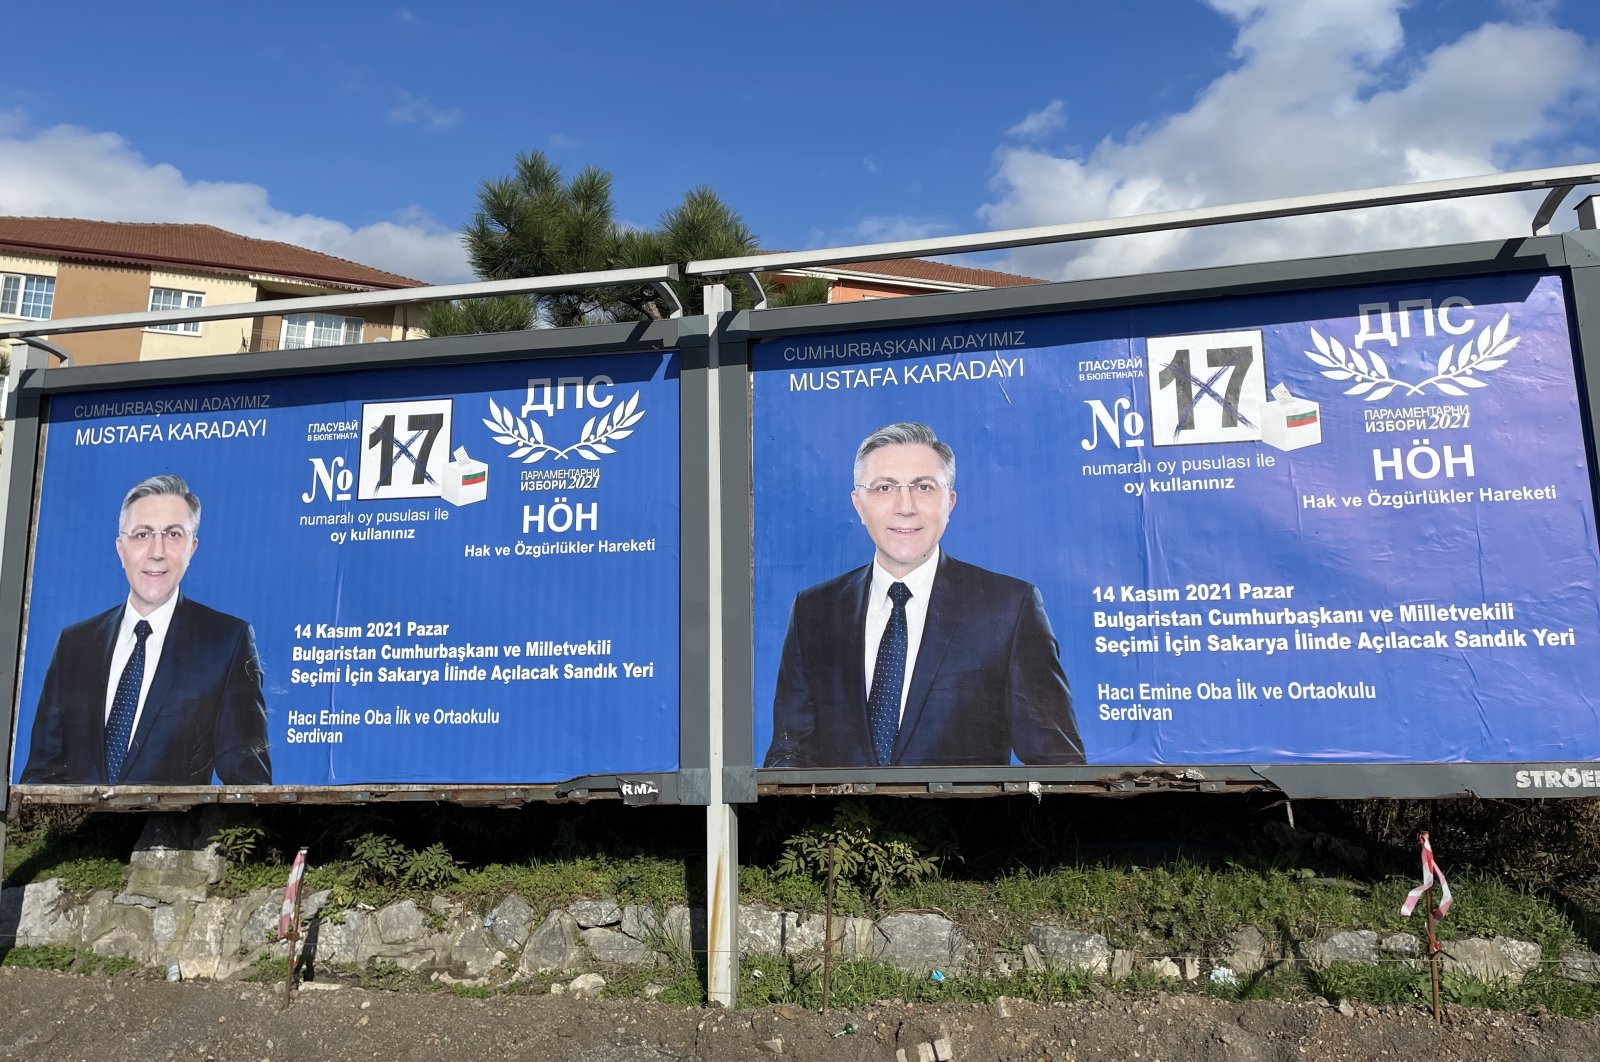 An election banner calling the on the Turkish minority in Bulgaria to vote for Movement for Rights and Freedoms candidate Mustafa Karadayı in presidential elections, Bulgaria, Nov. 11, 2021. (AA Photo)